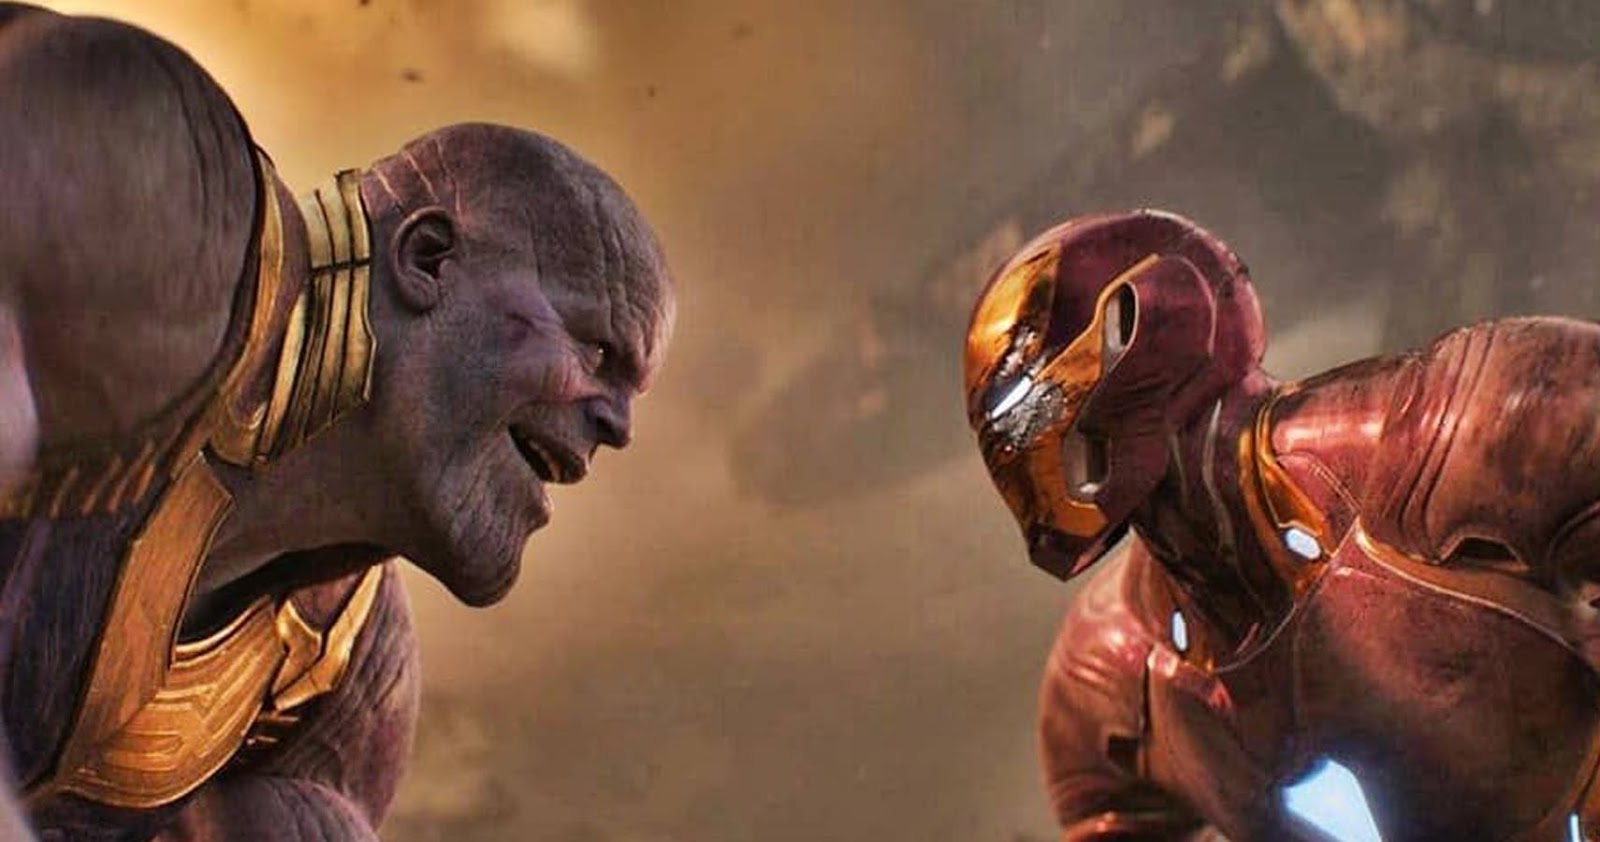 Iron Man and Thanos: Two sides of the Same Coin